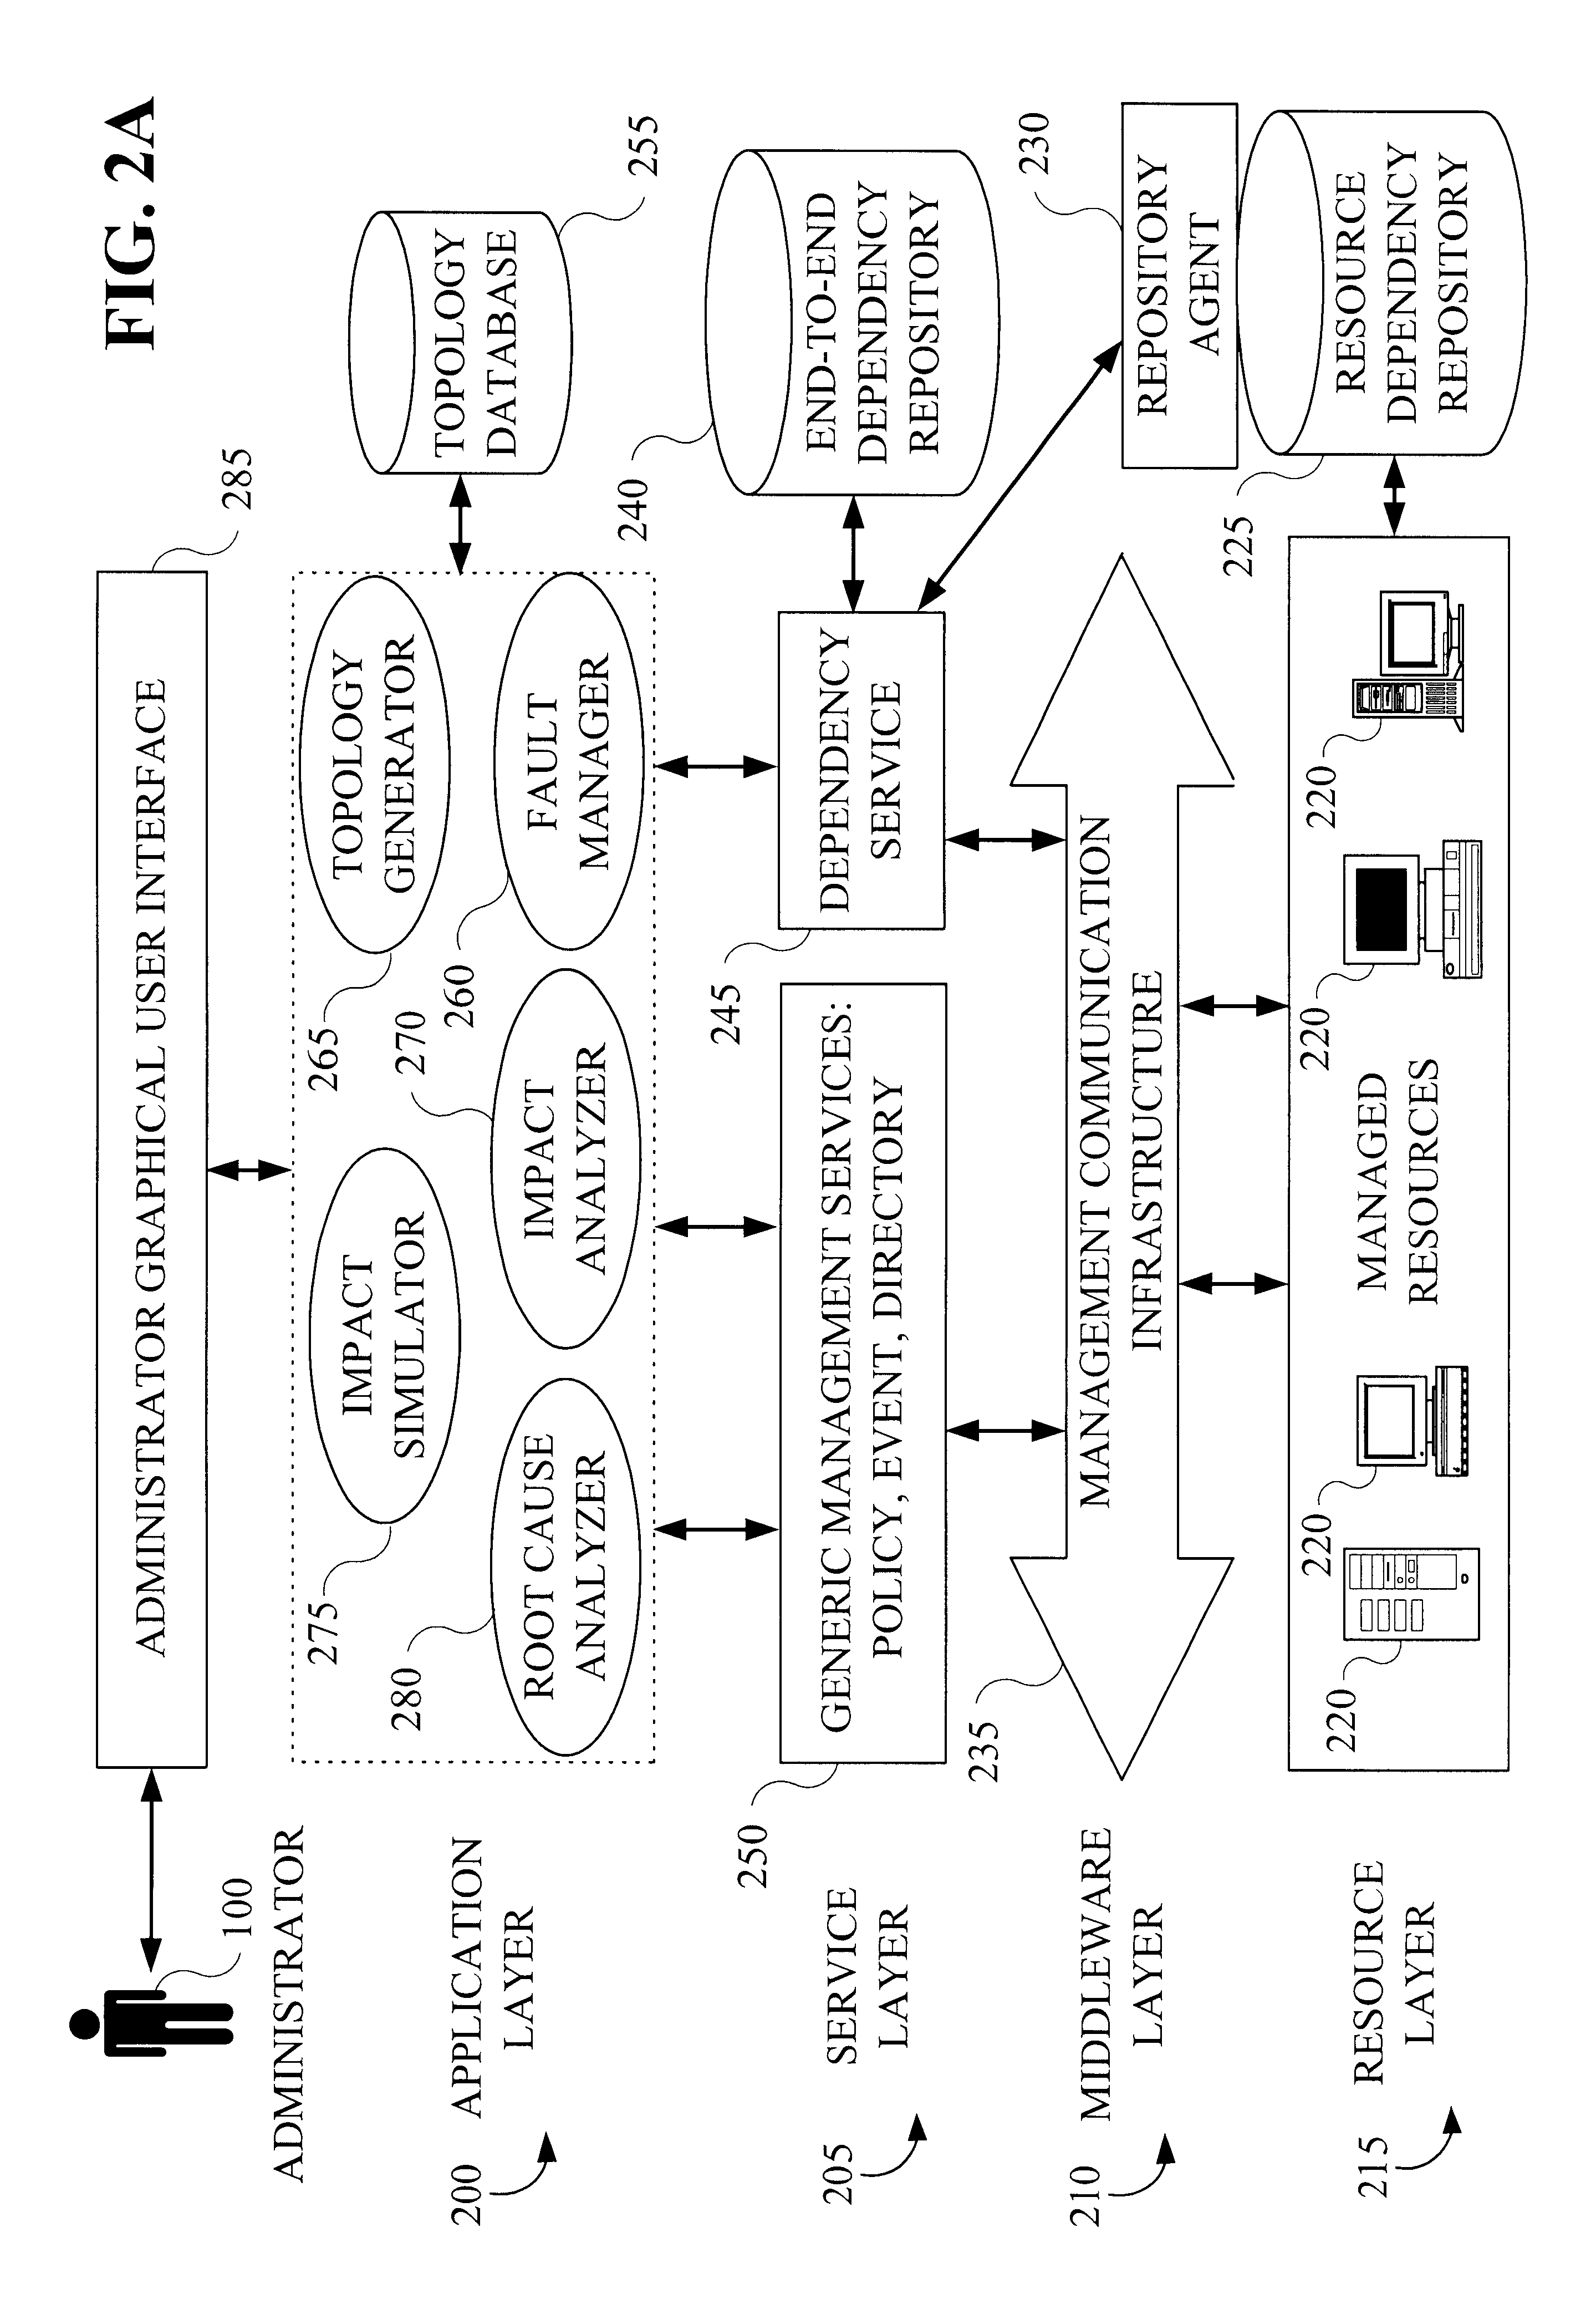 Methods and apparatus for managing dependencies in distributed systems